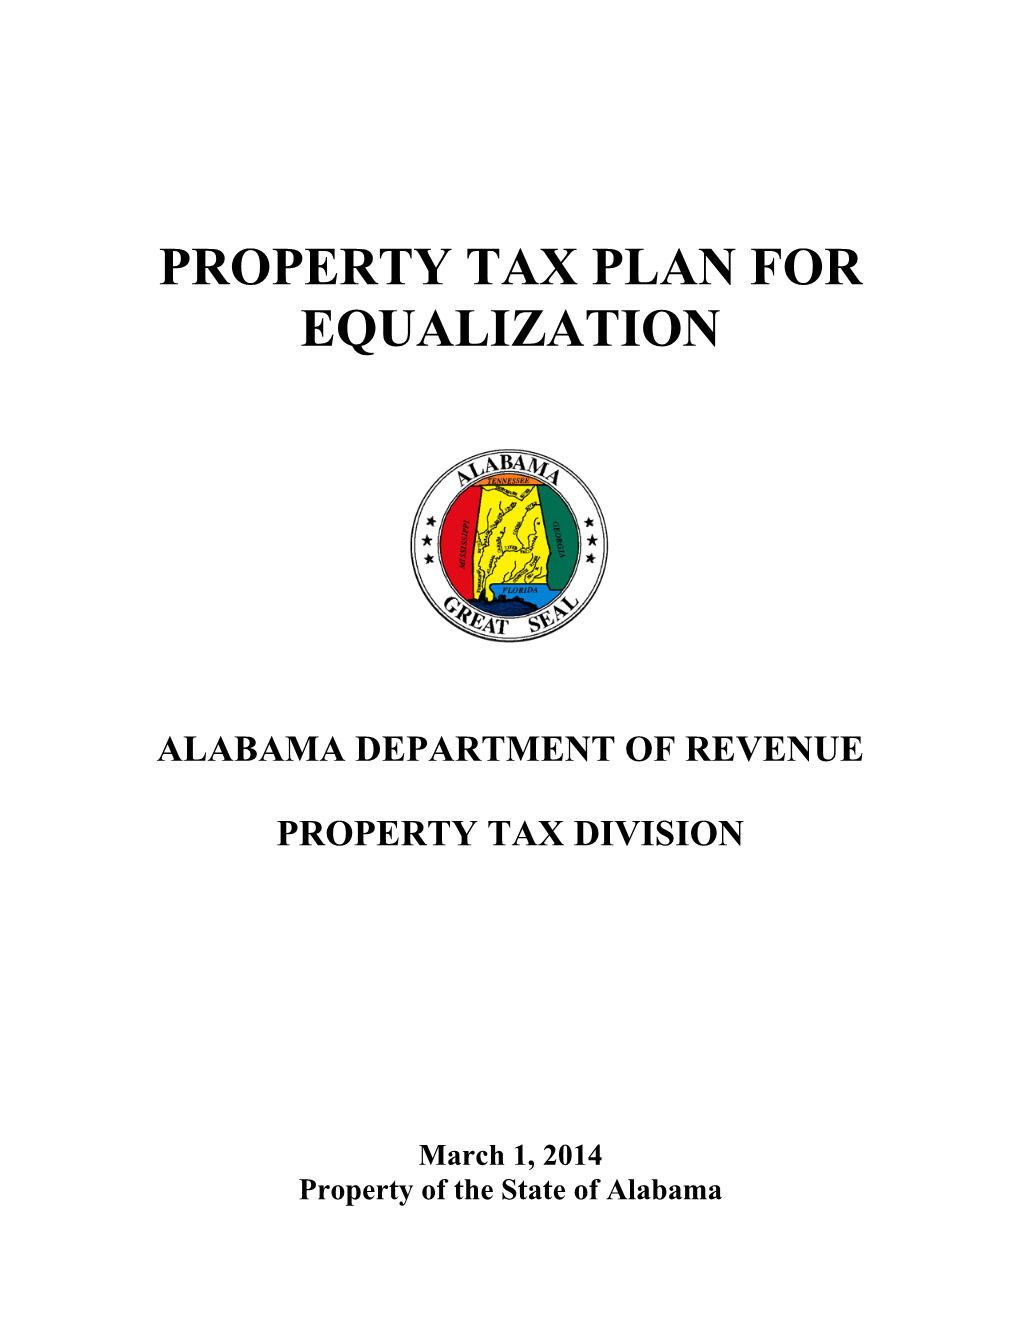 Property Tax Plan for Equalization